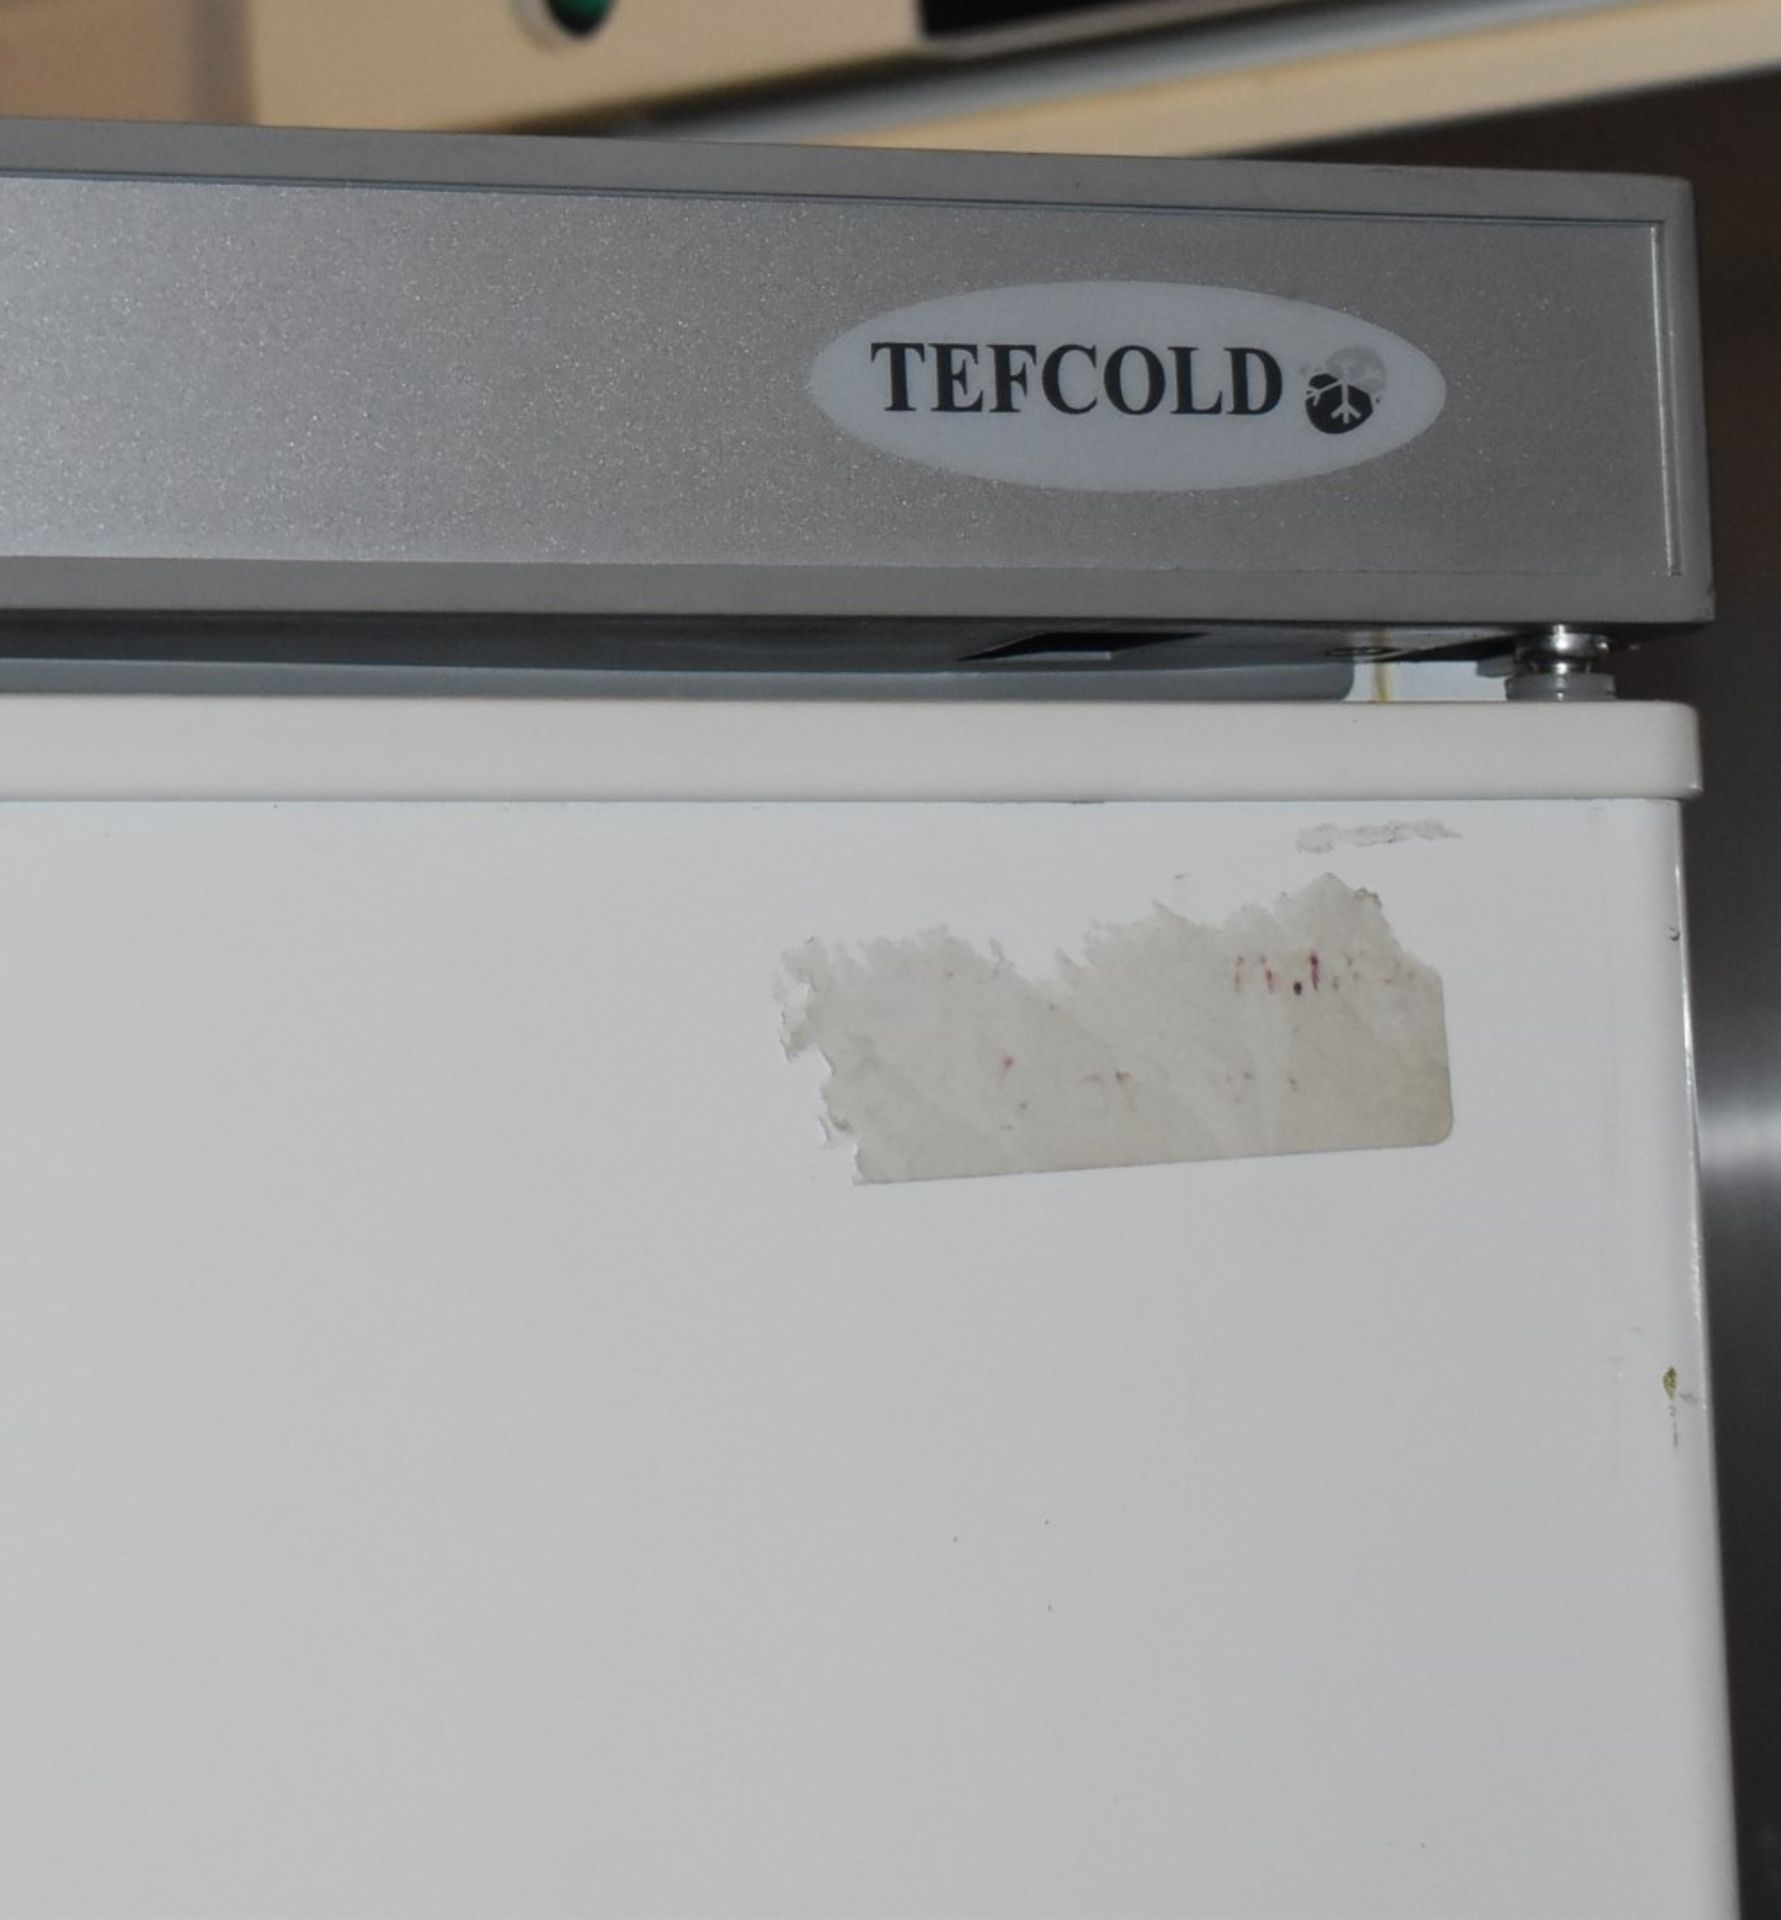 1 x Tefcold UR55 Upright Commercial Solid Door Refrigerator - Size: H172 x W77.7 x D72cms - Ref: - Image 3 of 8